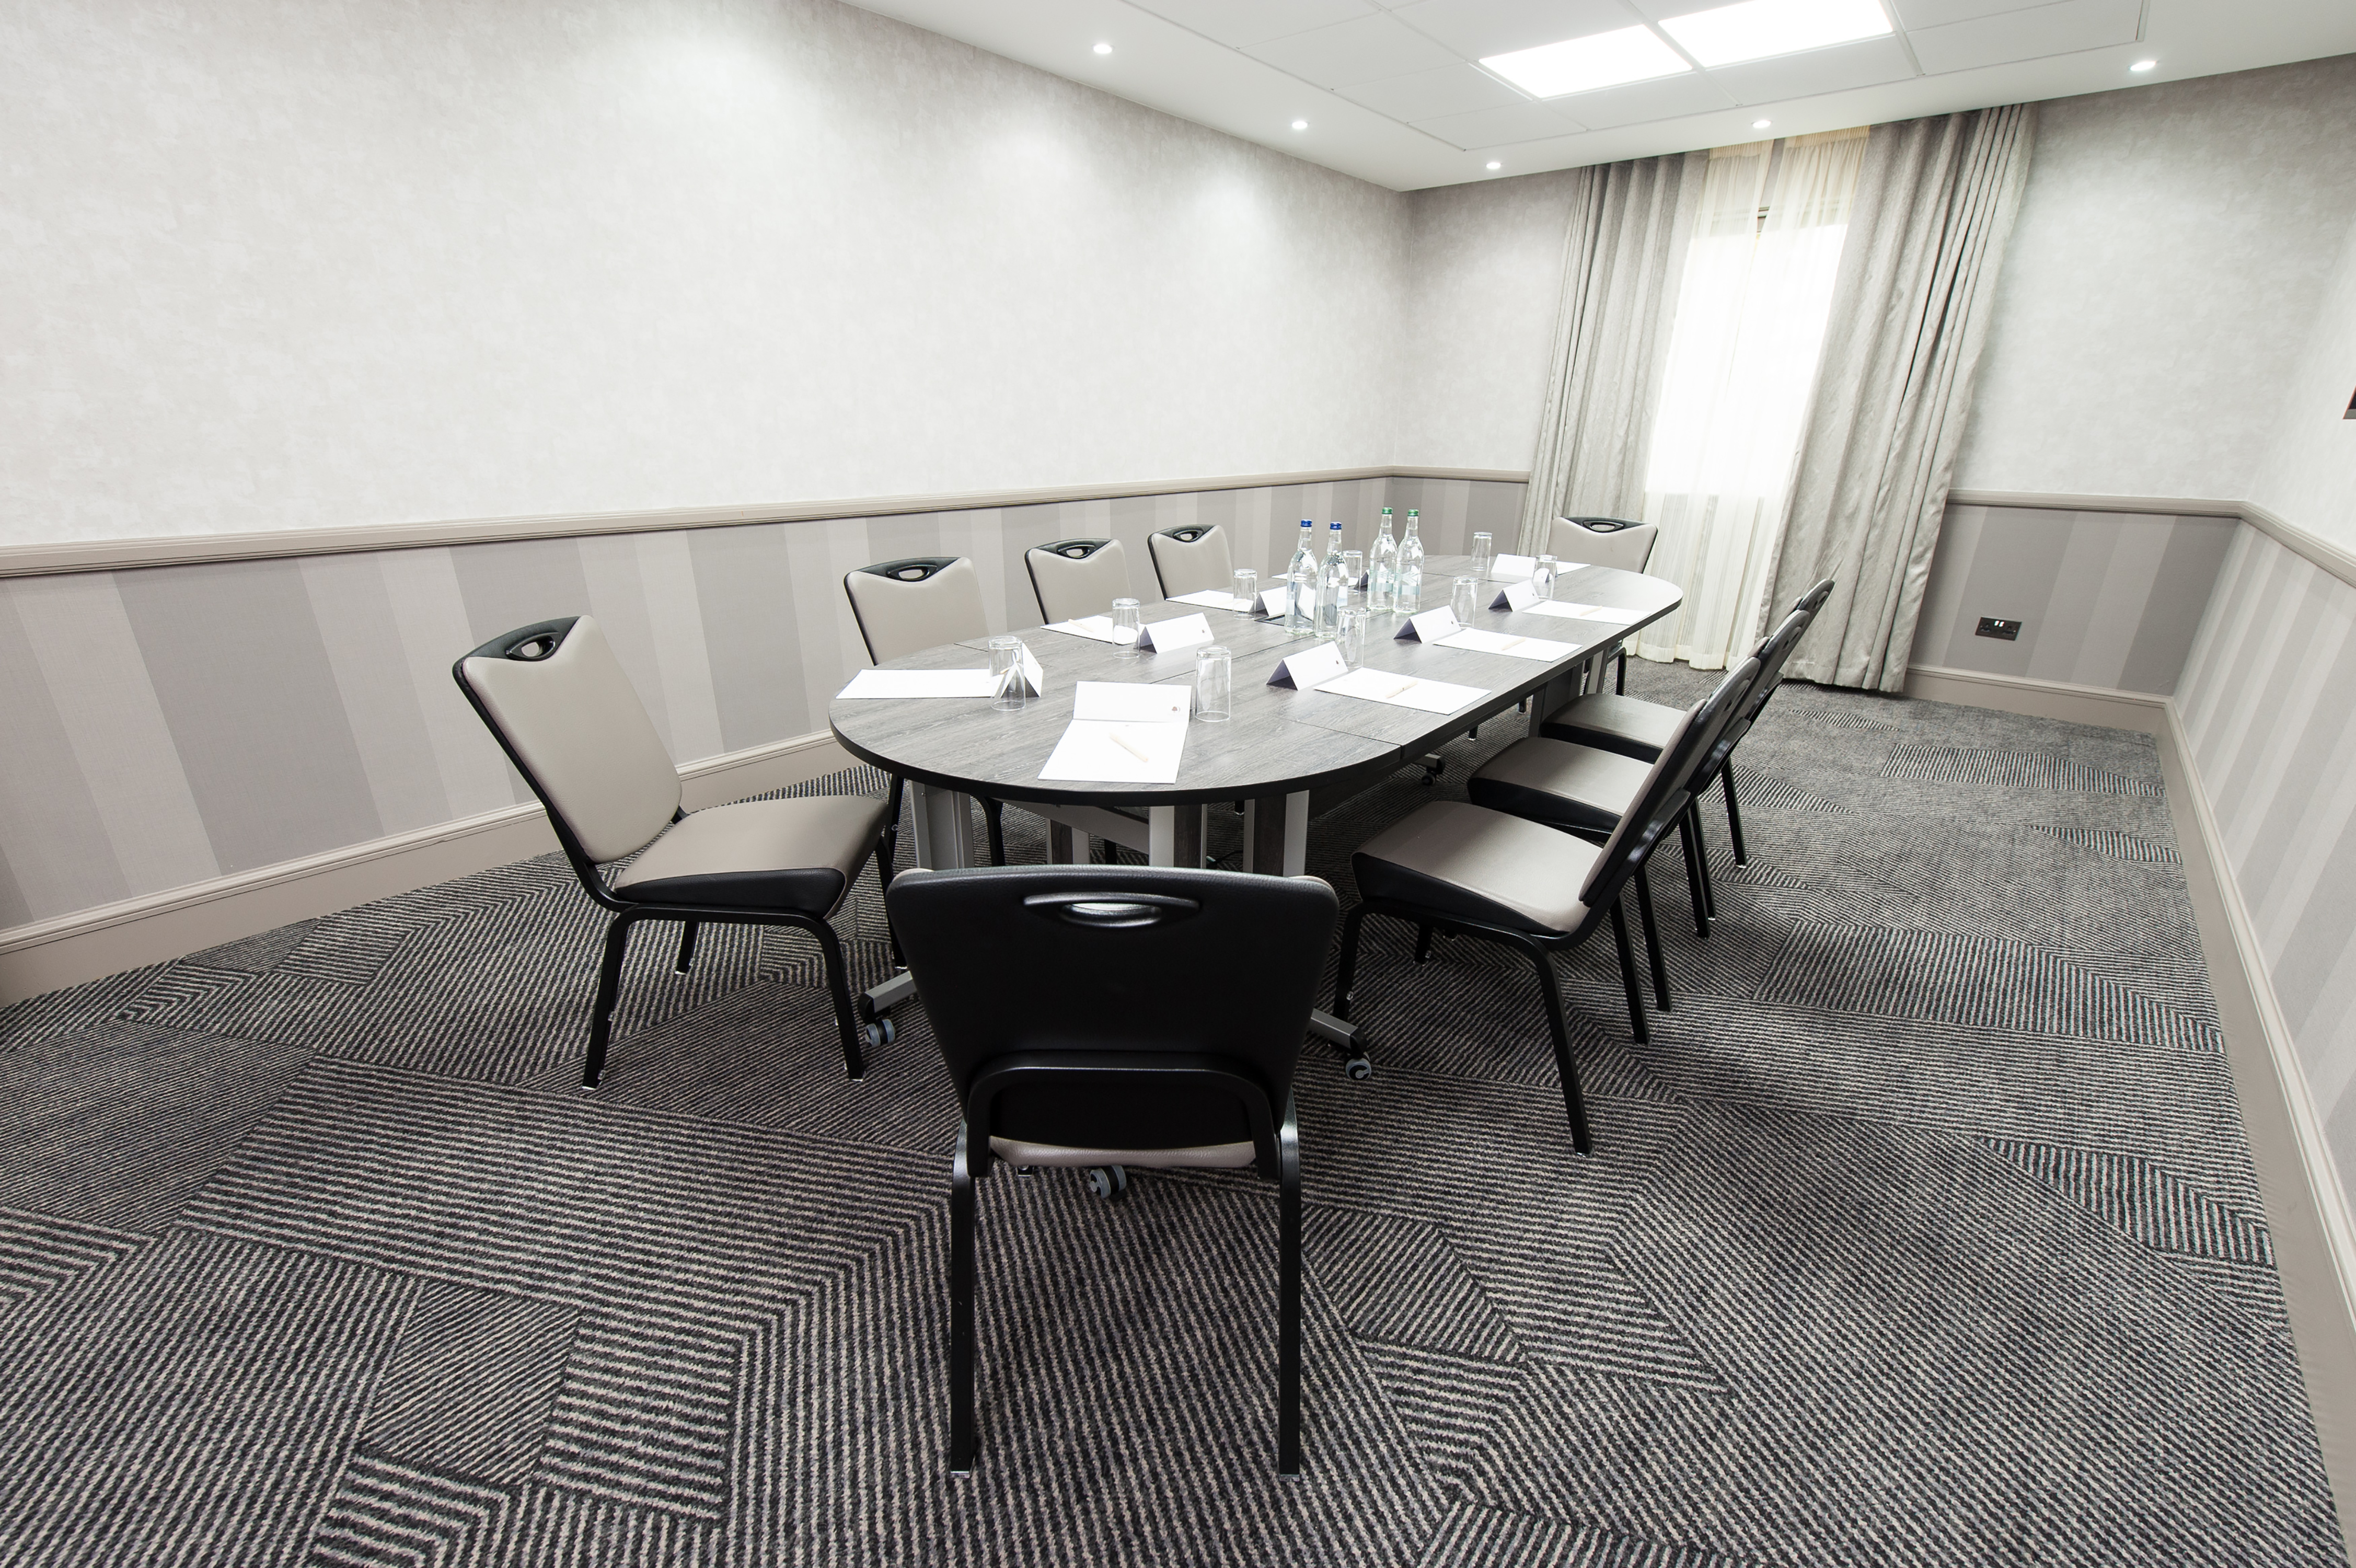 Meeting Room With Seating for Nine Around Boardroom Table With Water Bottles and Window With Long Drapes